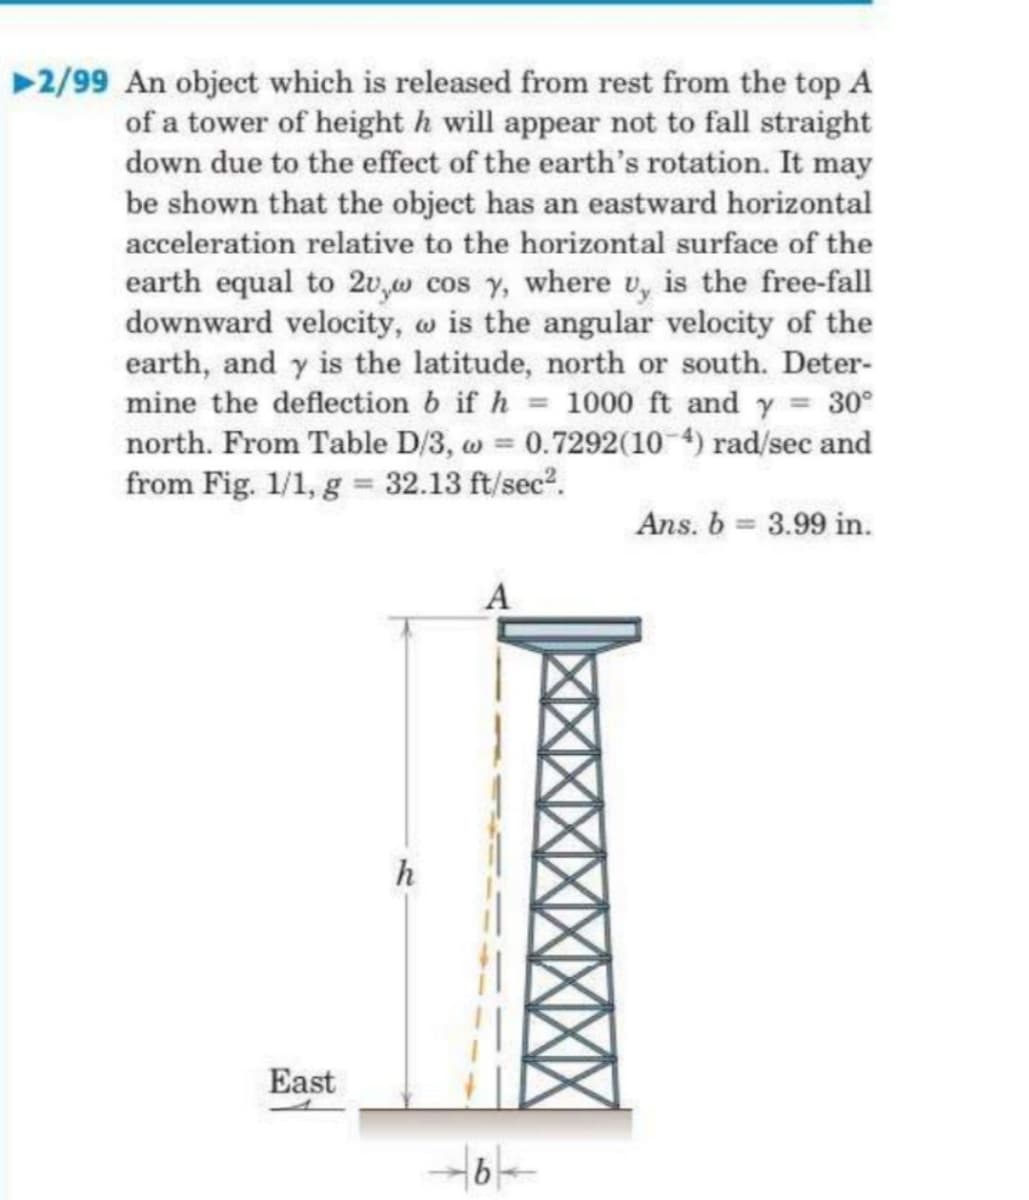 2/99 An object which is released from rest from the top A
of a tower of height h will appear not to fall straight
down due to the effect of the earth's rotation. It may
be shown that the object has an eastward horizontal
acceleration relative to the horizontal surface of the
earth equal to 2u,w cos y, where u, is the free-fall
downward velocity, w is the angular velocity of the
earth, and y is the latitude, north or south. Deter-
mine the deflection b if h = 1000 ft and y = 30°
north. From Table D/3, w = 0.7292(10 4) rad/sec and
from Fig. 1/1, g = 32.13 ft/sec?.
Ans. b = 3.99 in.
h
East
